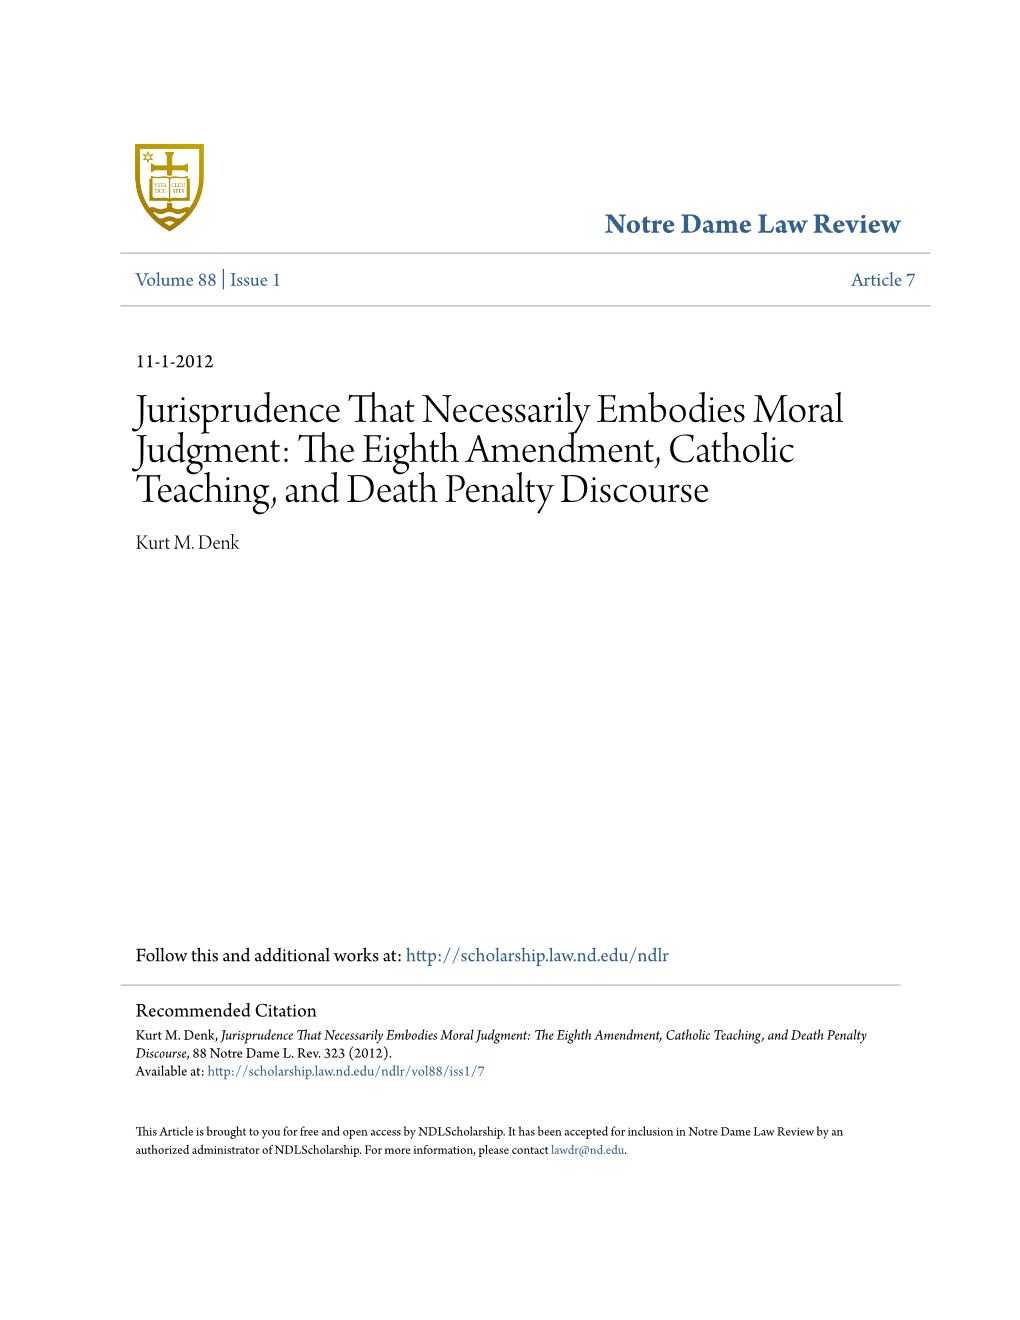 The Eighth Amendment, Catholic Teaching, and Death Penalty Discourse, 88 Notre Dame L